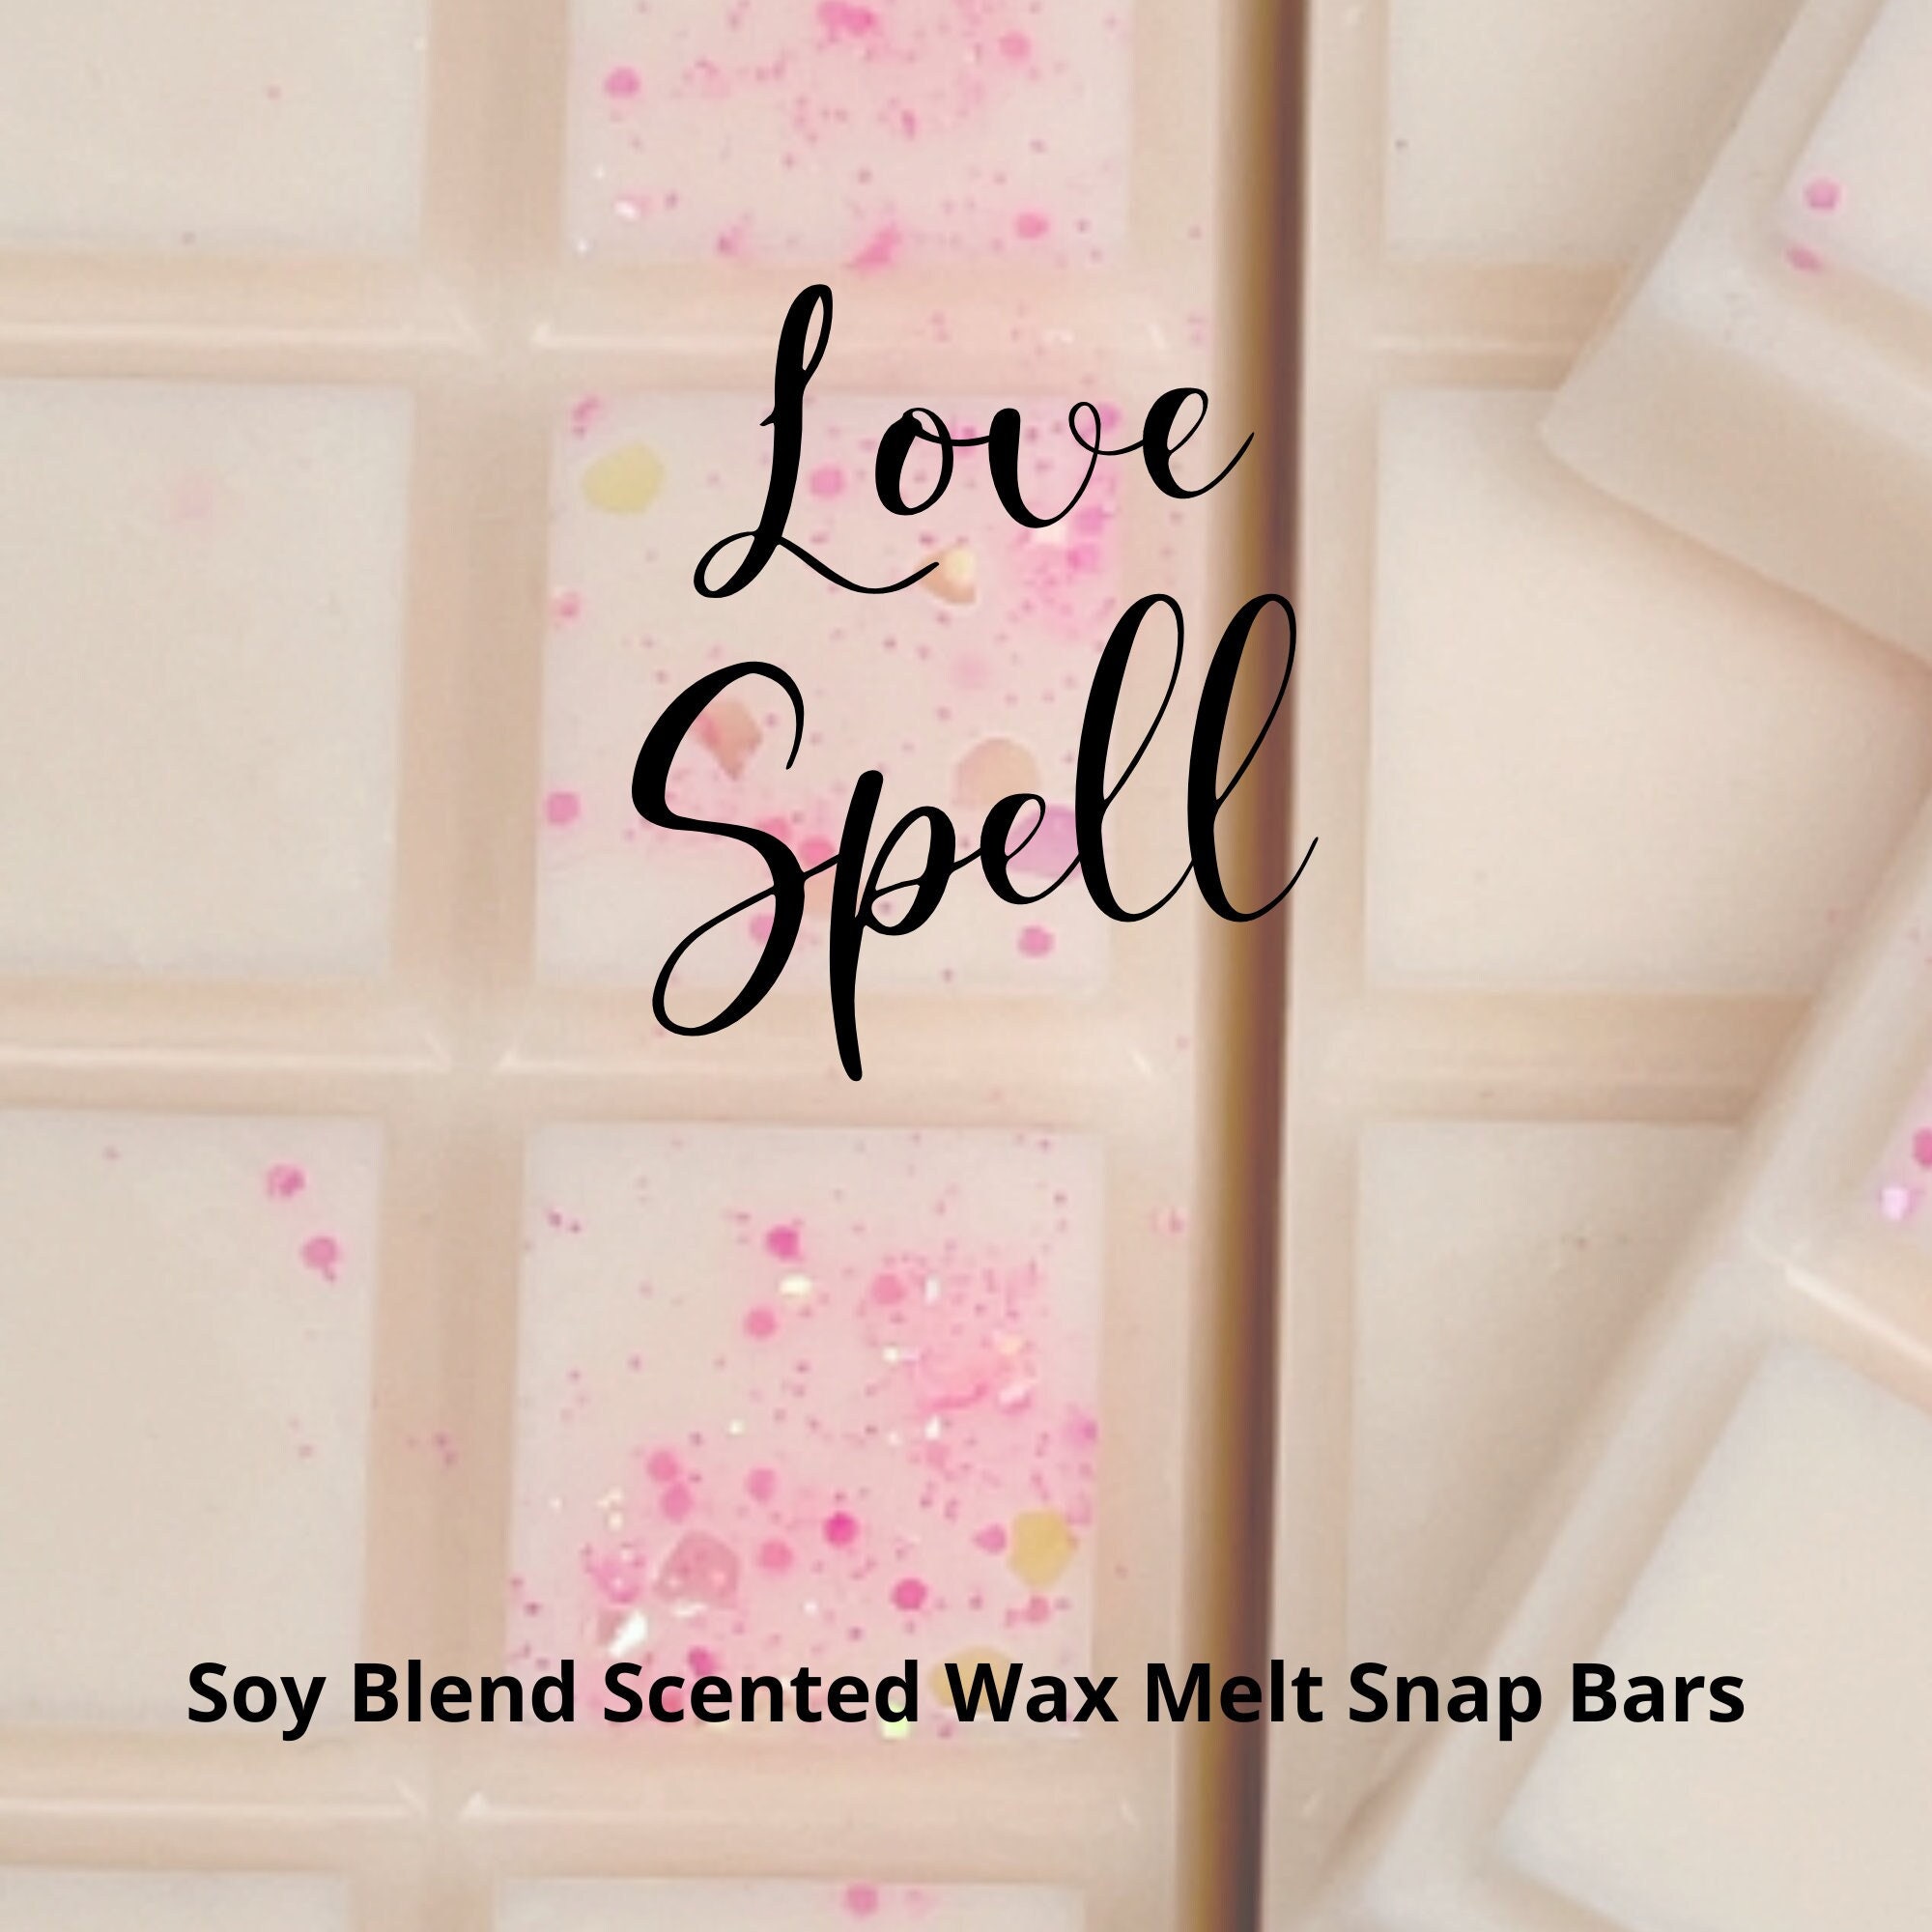 Champagne & Pomegranate Scented Wax Melts Soy Blend Highly 